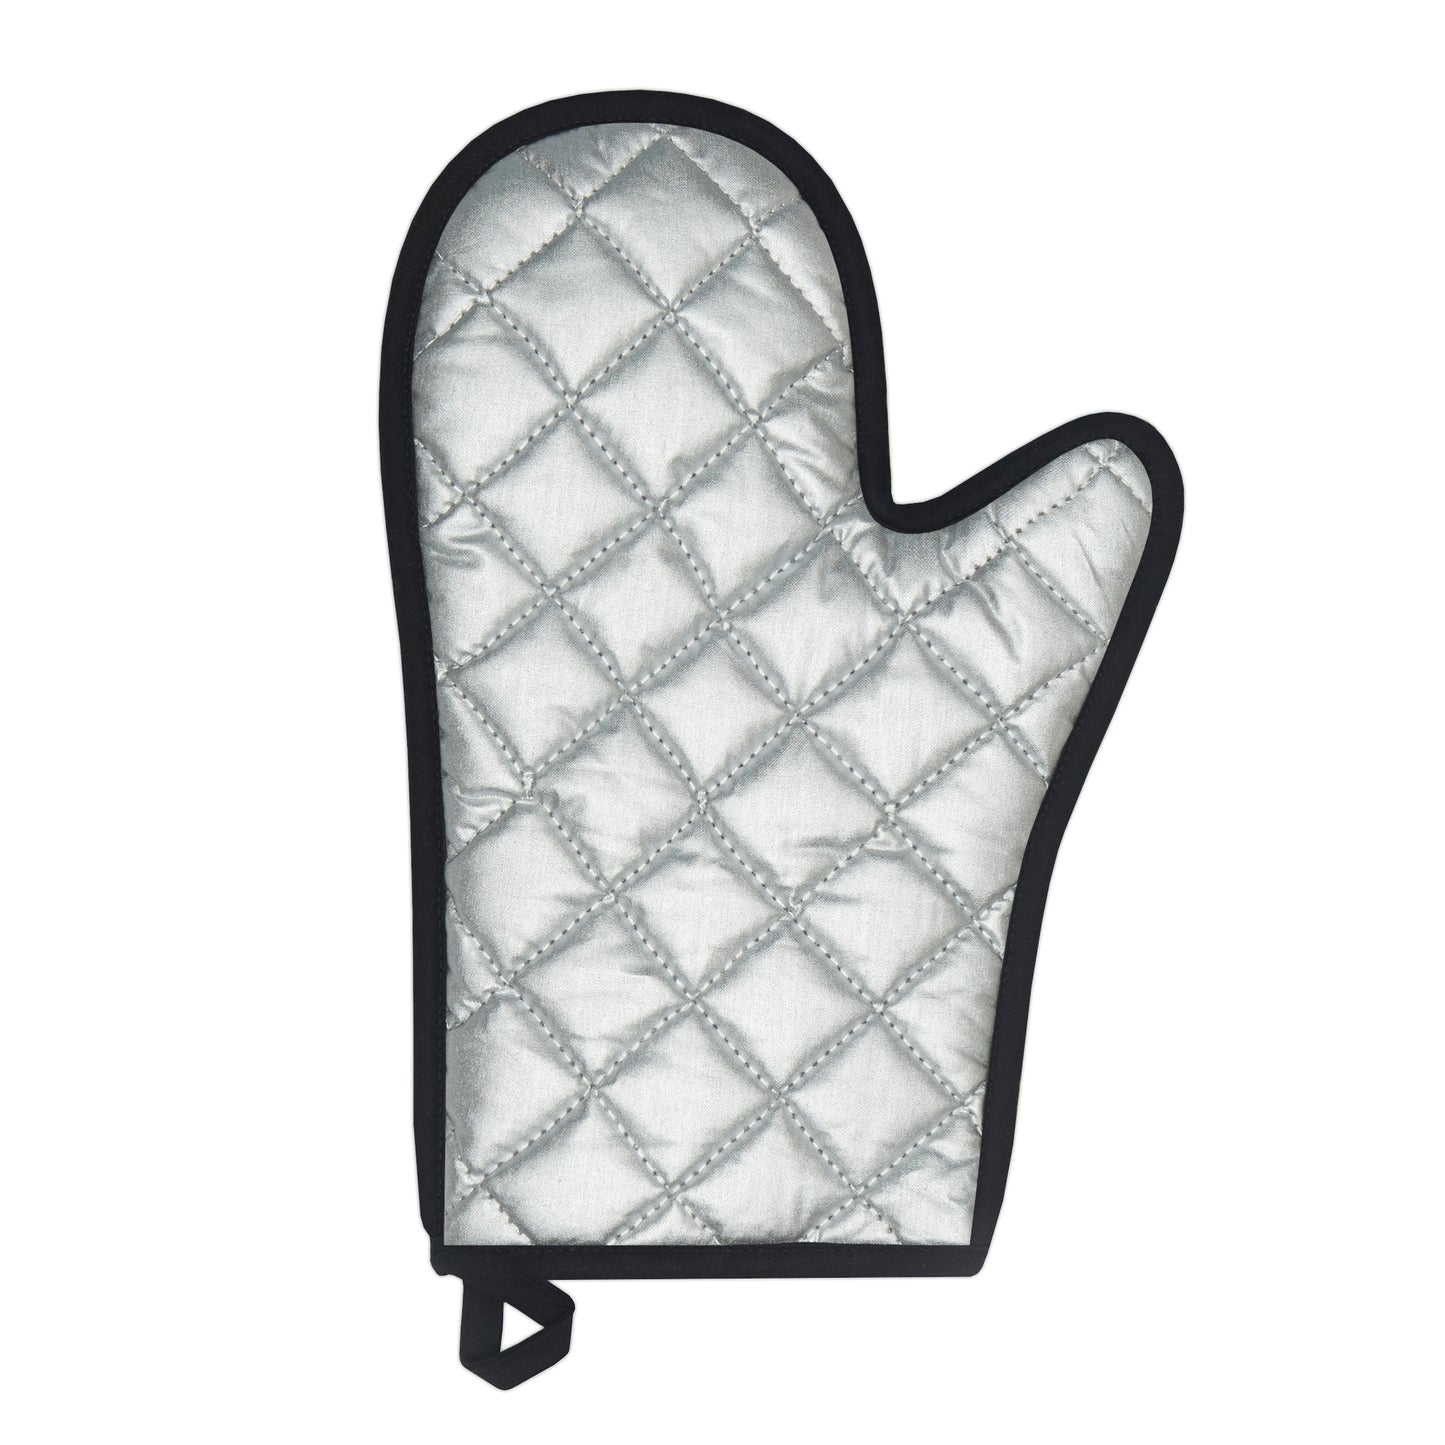 A Show of Hands Oven Glove